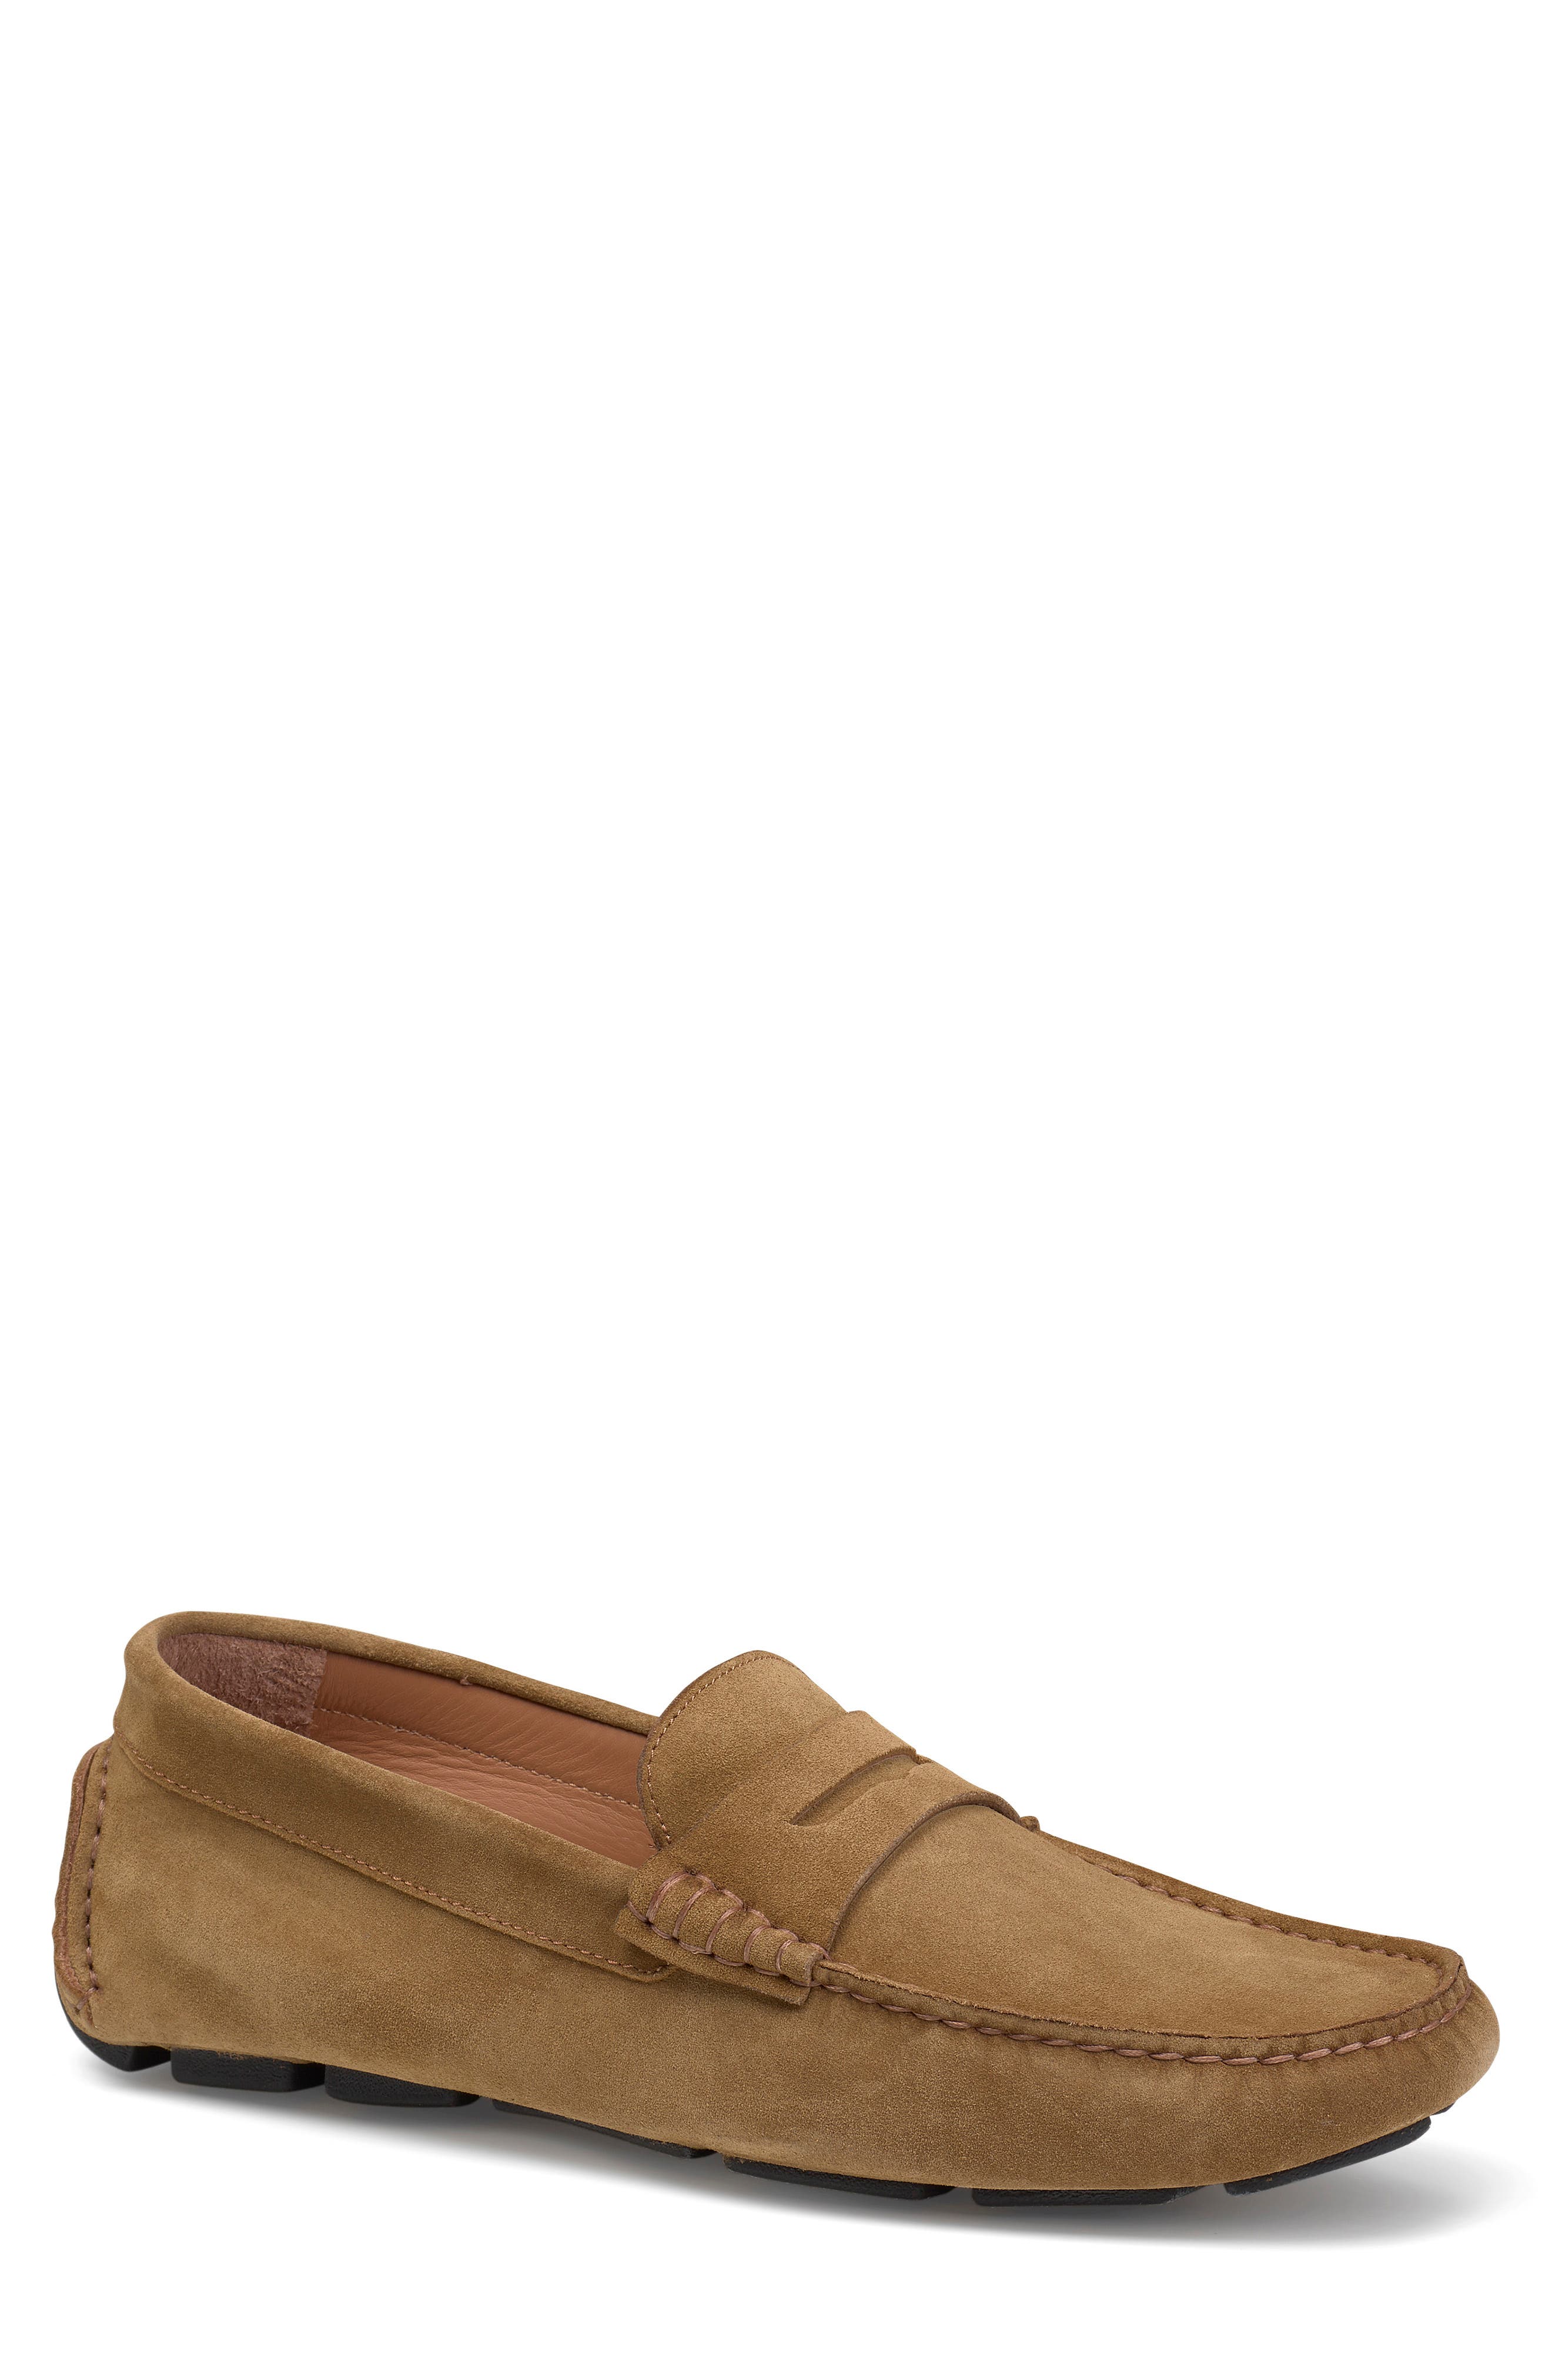 Trask Rowan Driving Penny Loafer In Camel Suede | ModeSens